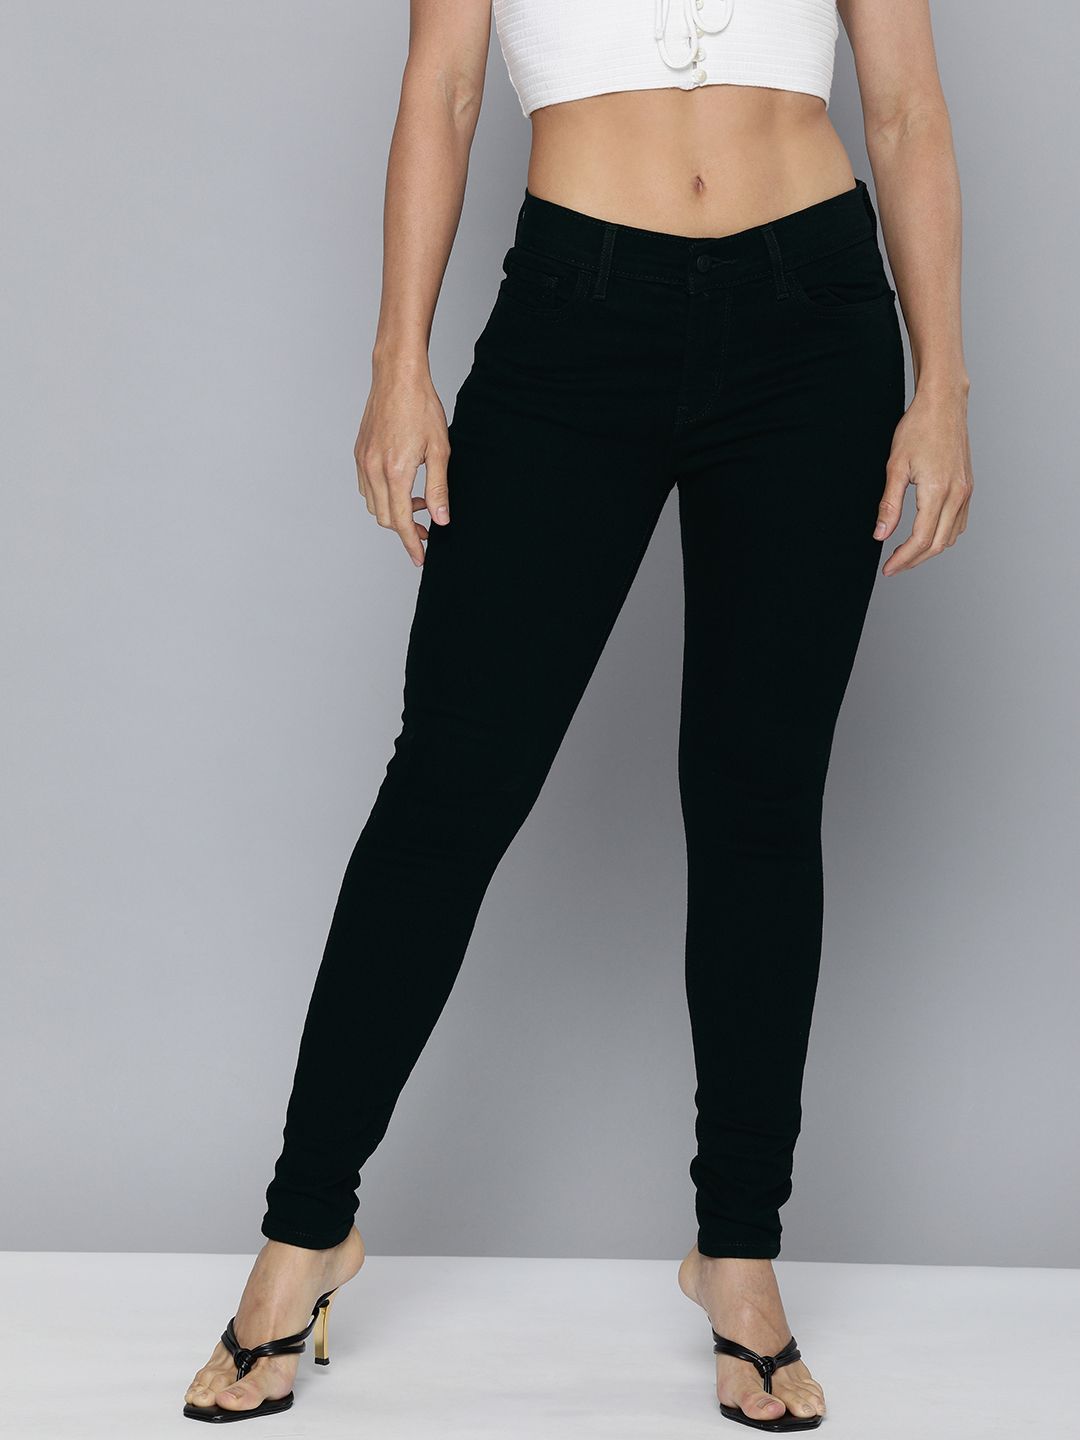 Levis Women Black Super Skinny Fit Stretchable Jeans Price in India